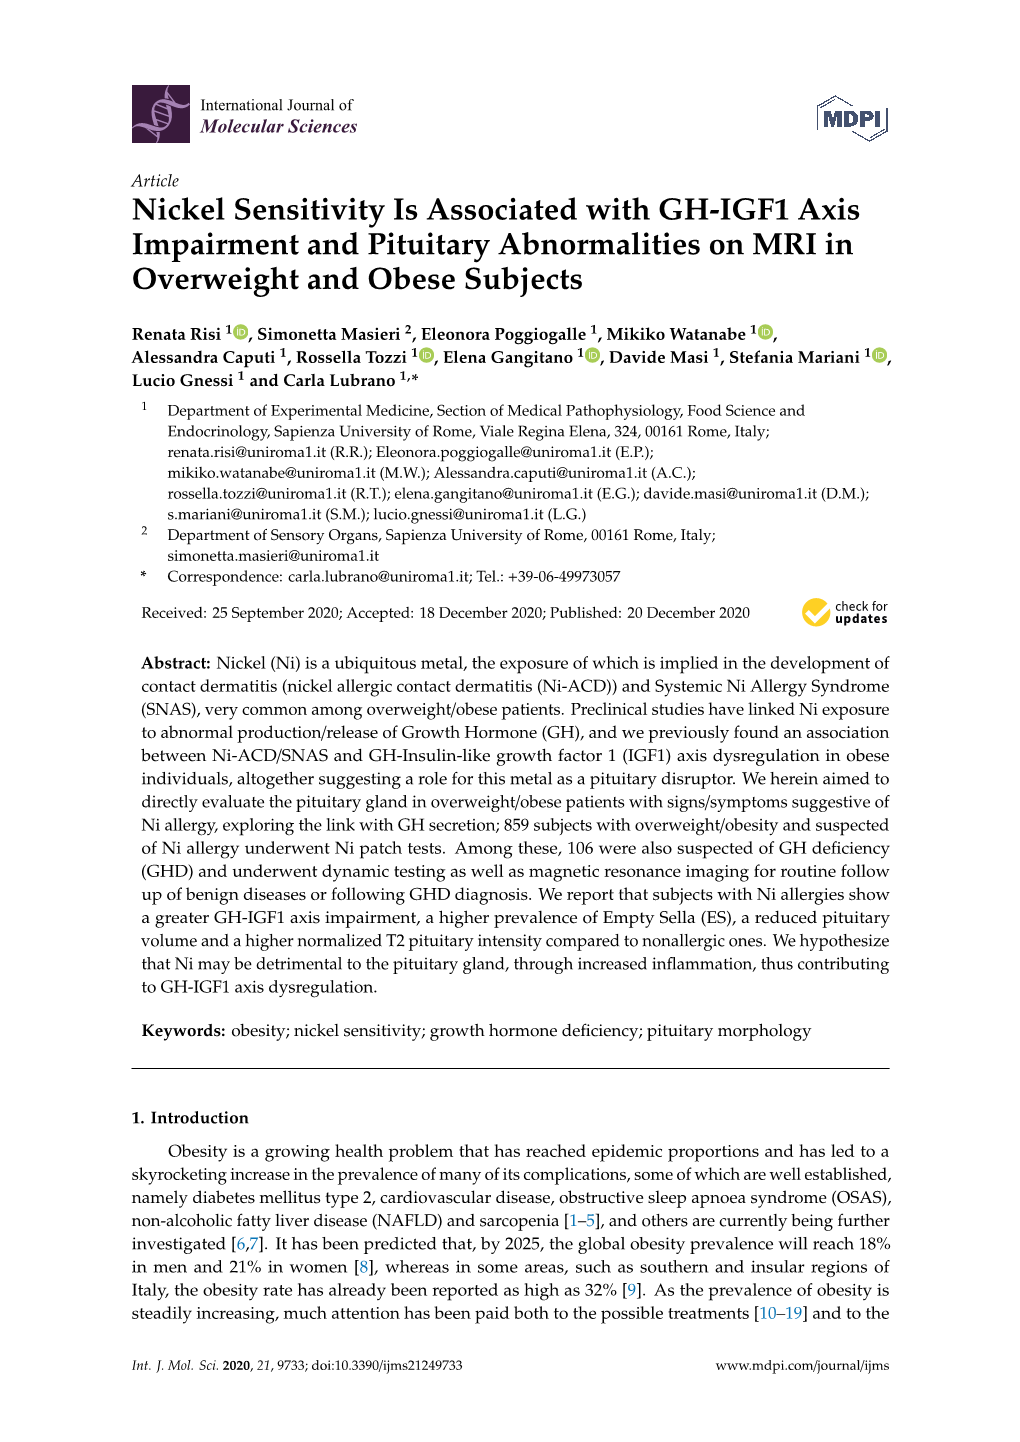 Nickel Sensitivity Is Associated with GH-IGF1 Axis Impairment and Pituitary Abnormalities on MRI in Overweight and Obese Subjects